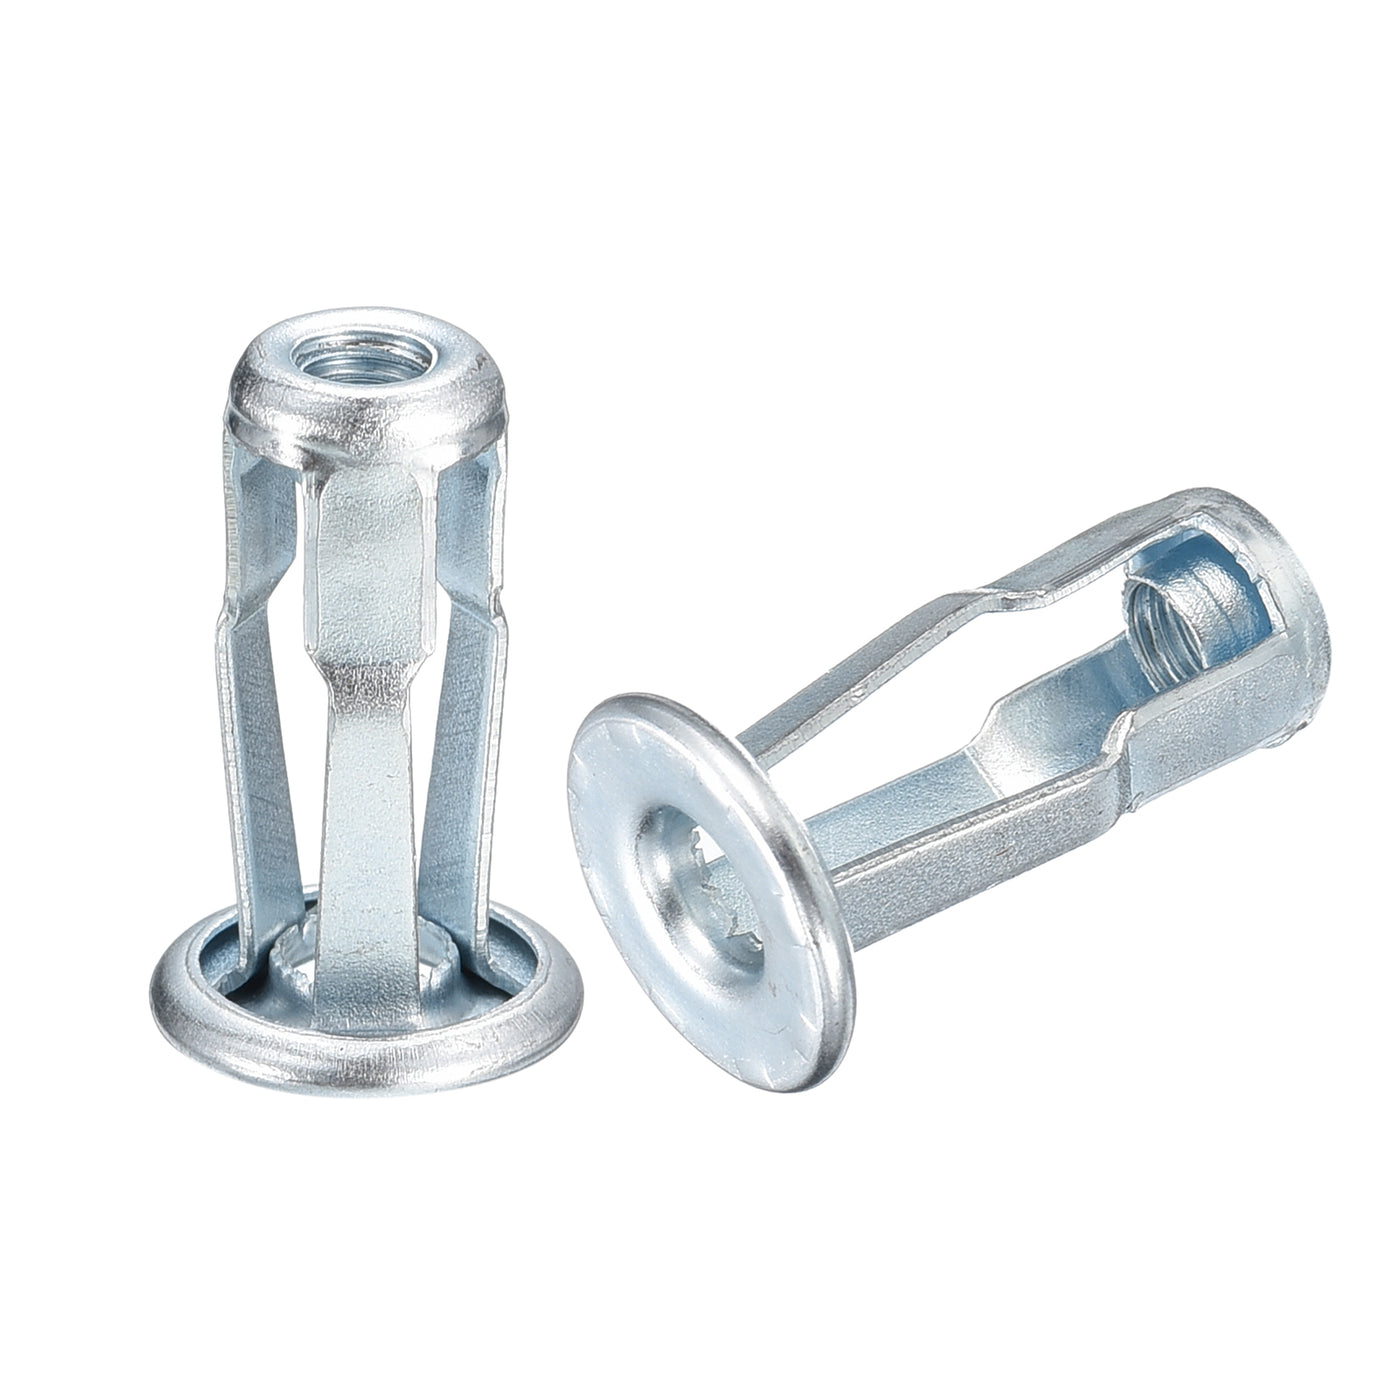 uxcell Uxcell Jack Nuts, Threaded Insert Nut 304 Stainless Steel Rivet Nuts for Thin Metal